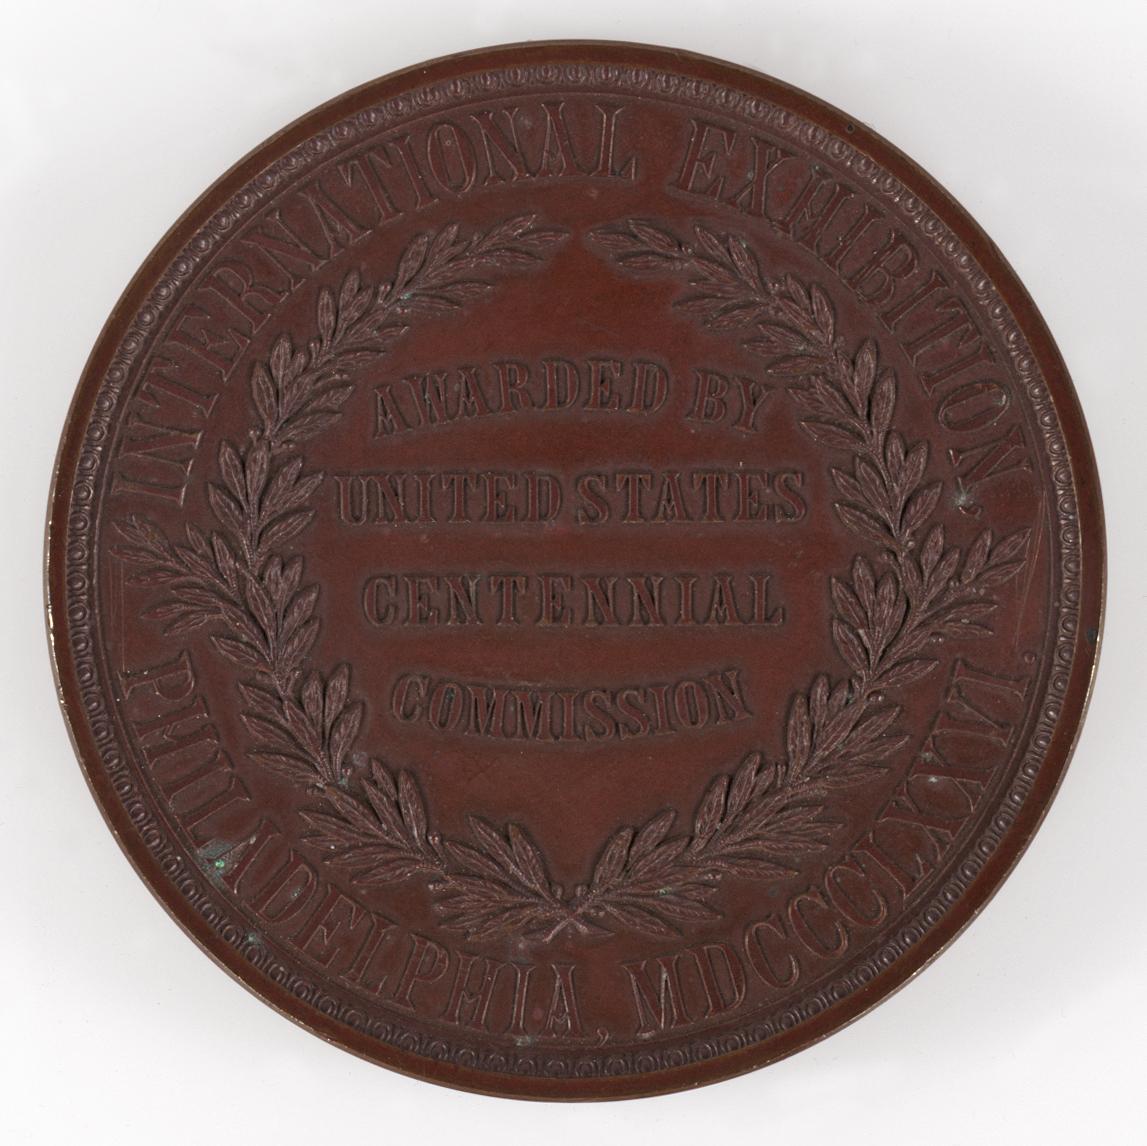 Hiram Smith 'Best Cheese' medal and case (1 of 6)